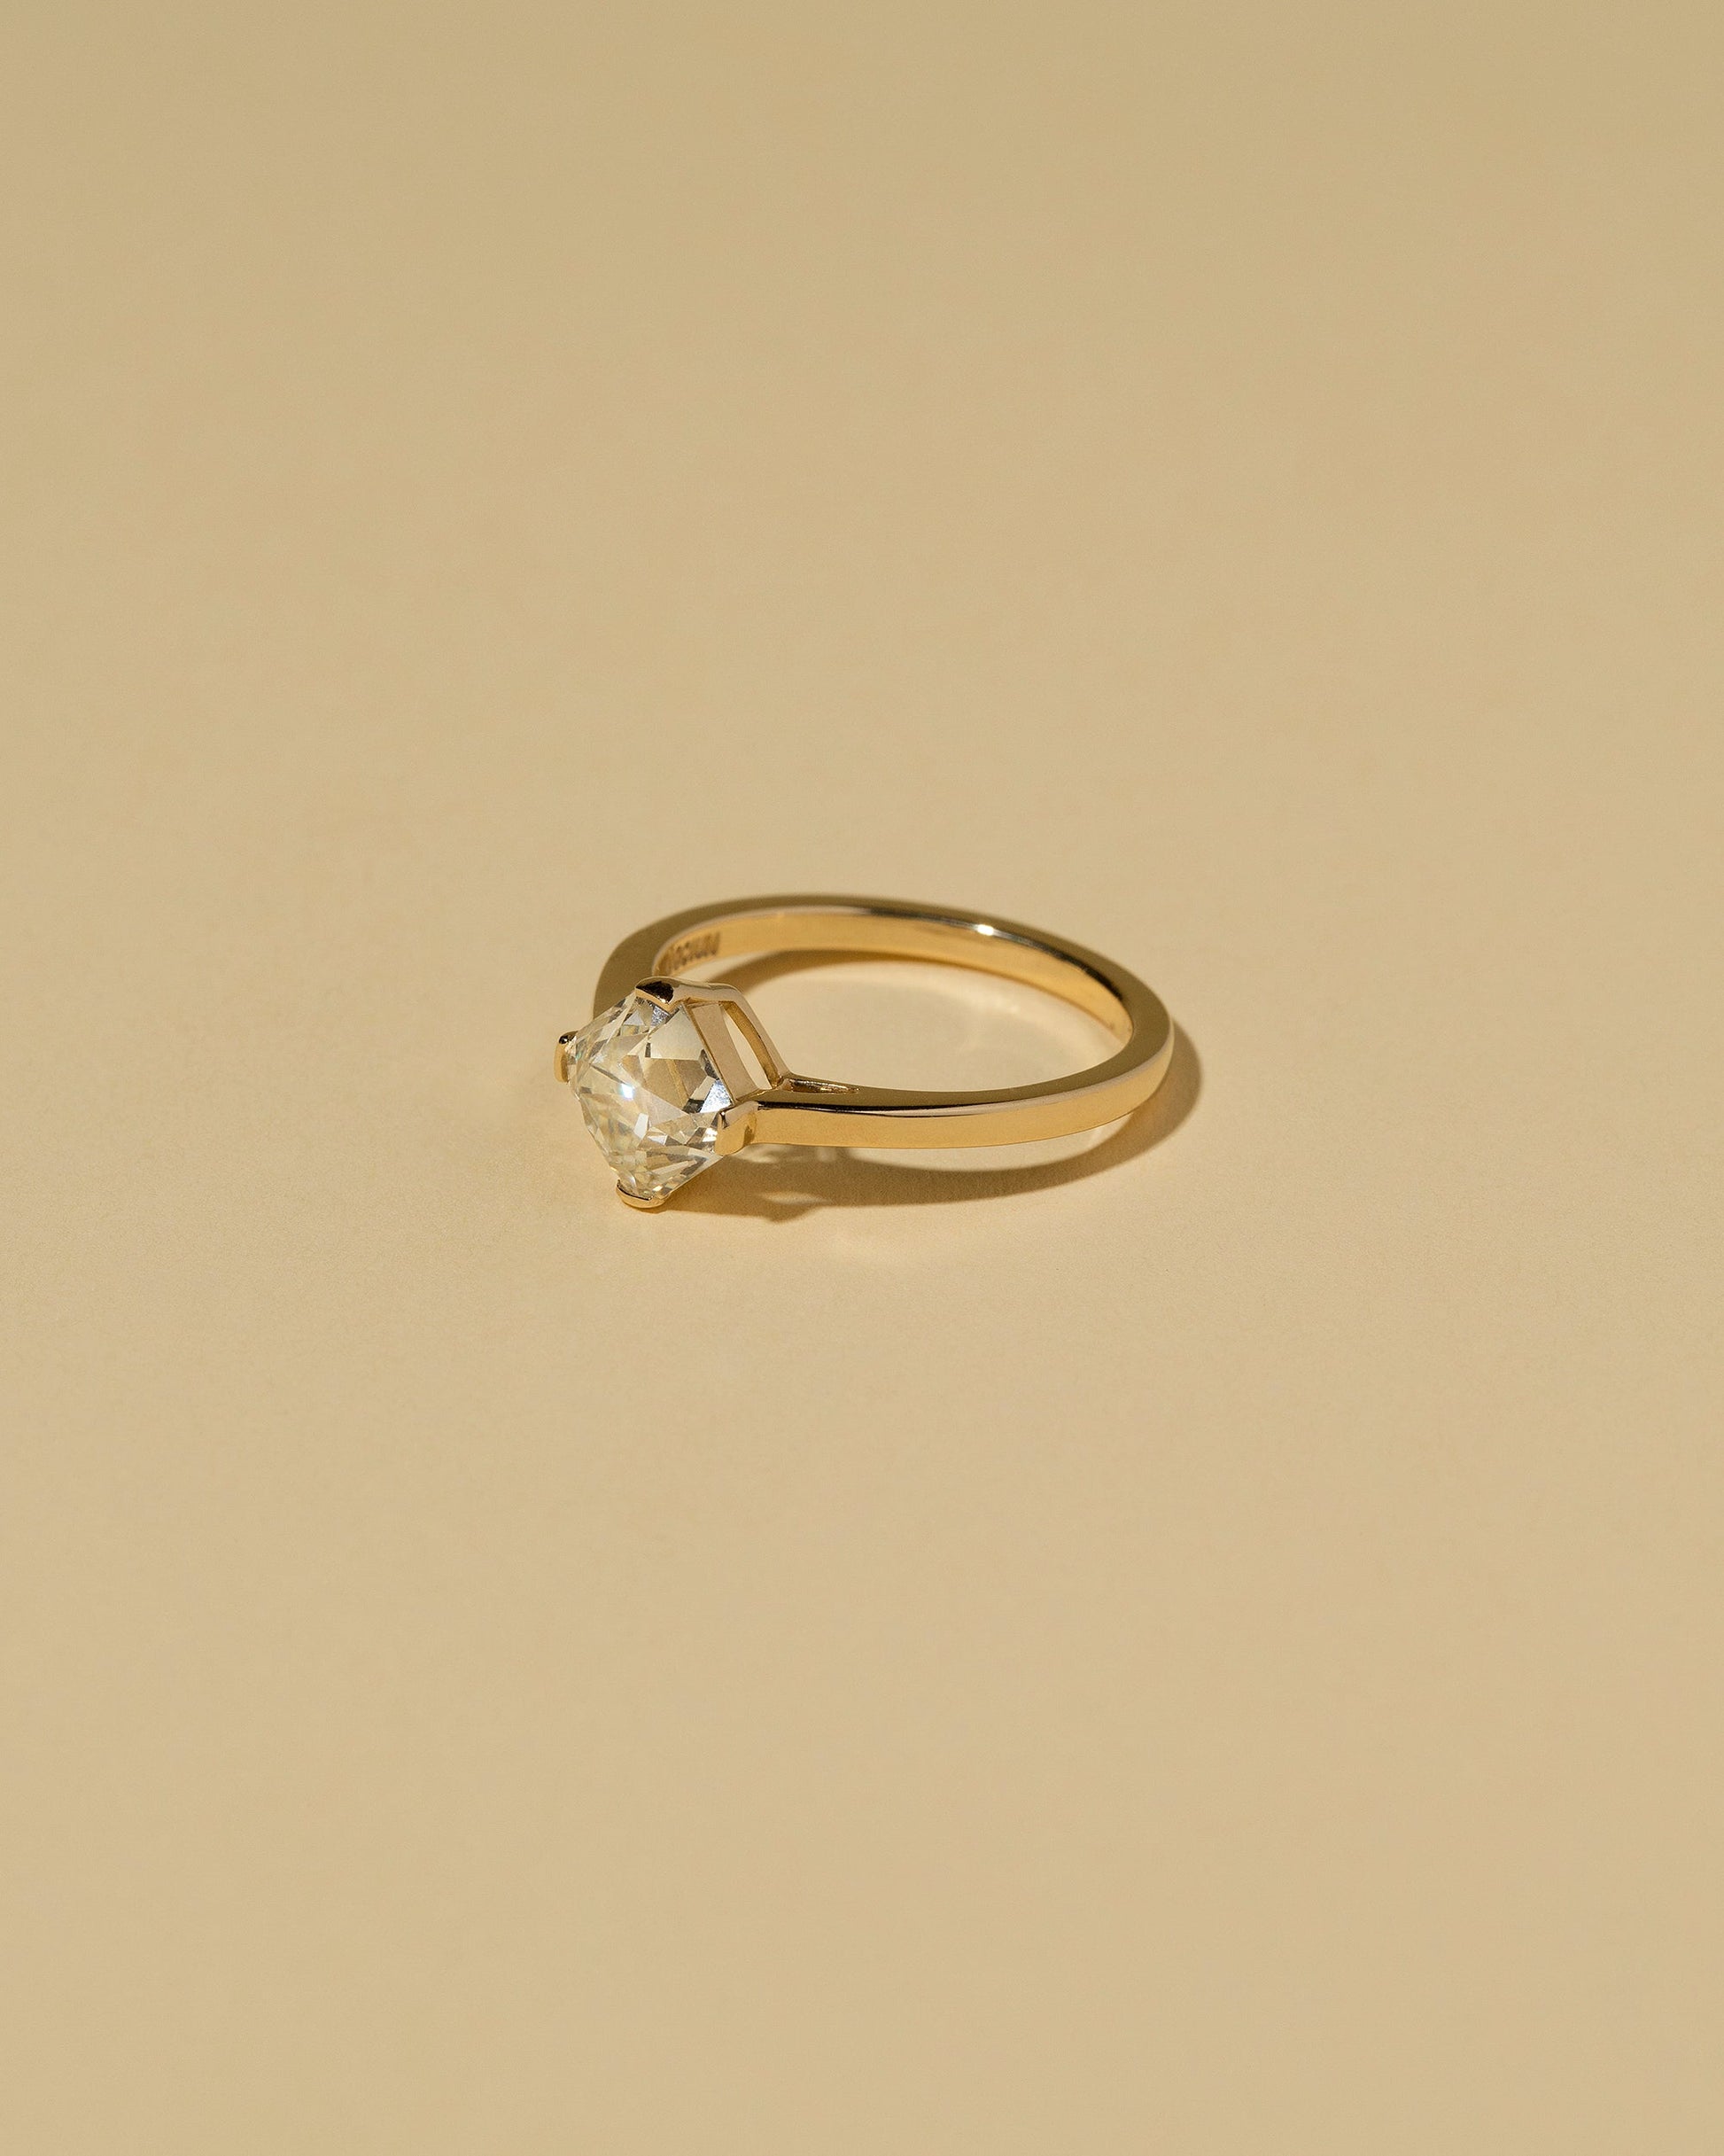  Cushion Modified Brilliant Diamond Solitaire Ring on light color background.